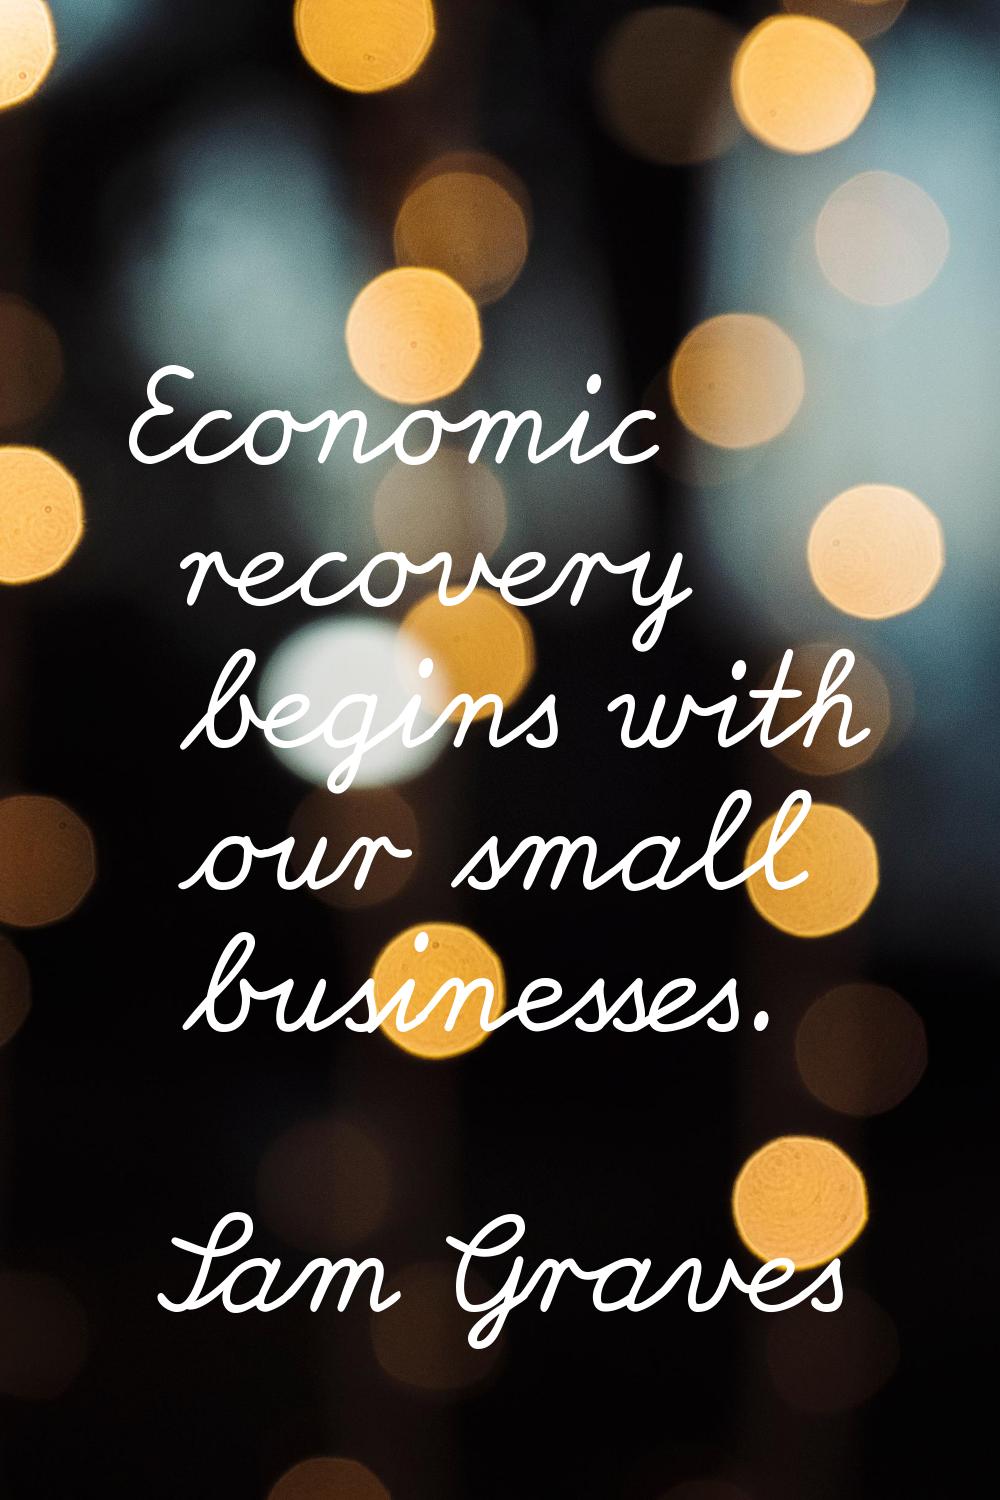 Economic recovery begins with our small businesses.